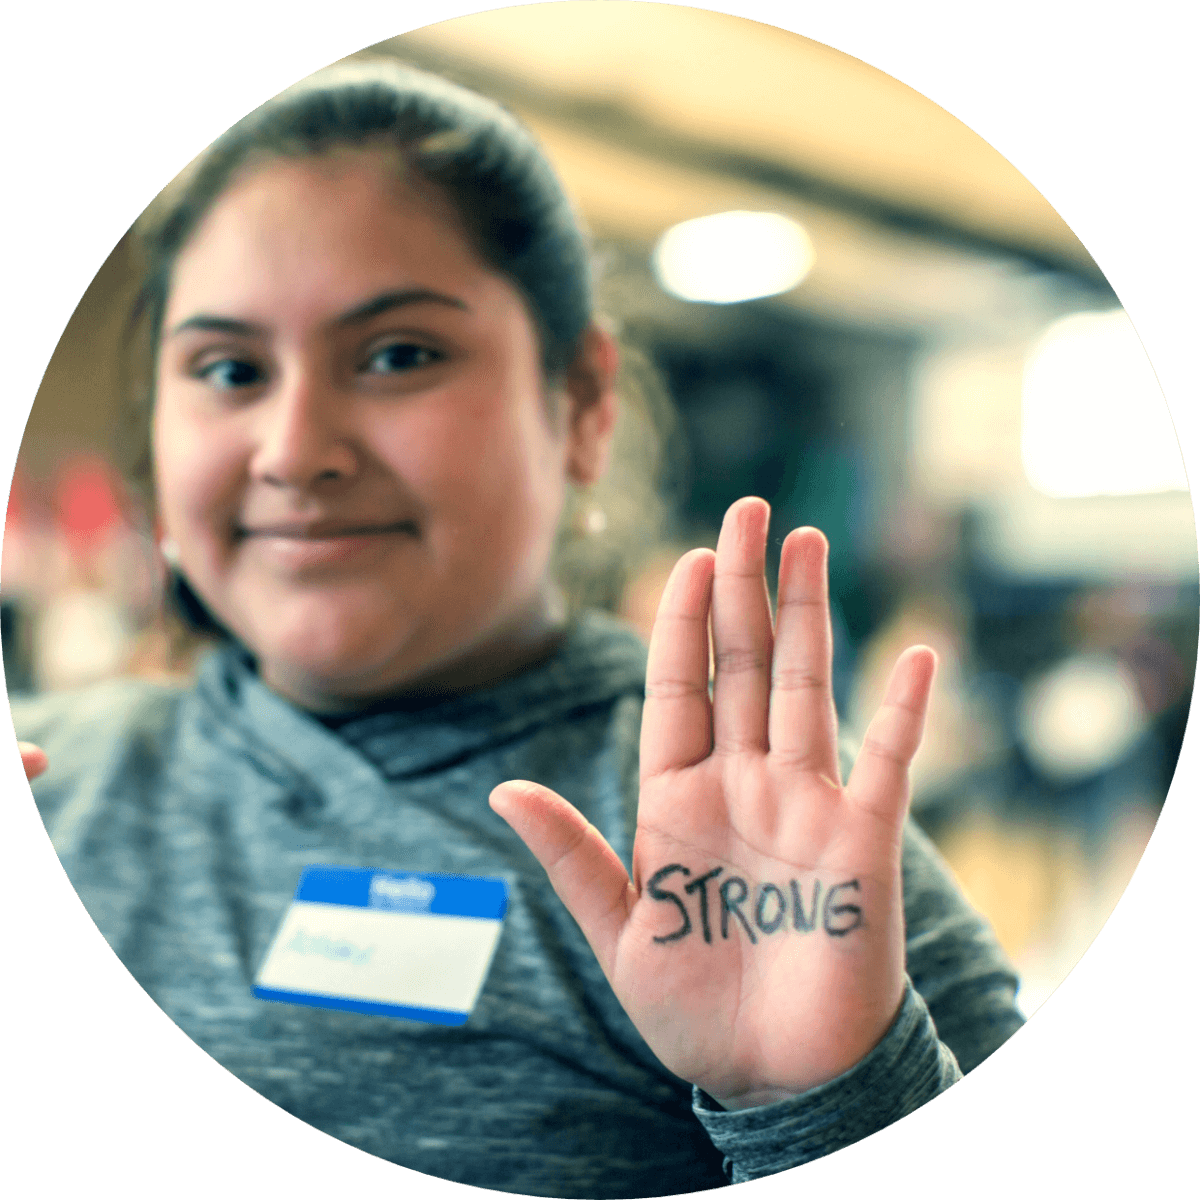 Girl holding up hand with 'Strong' written on it